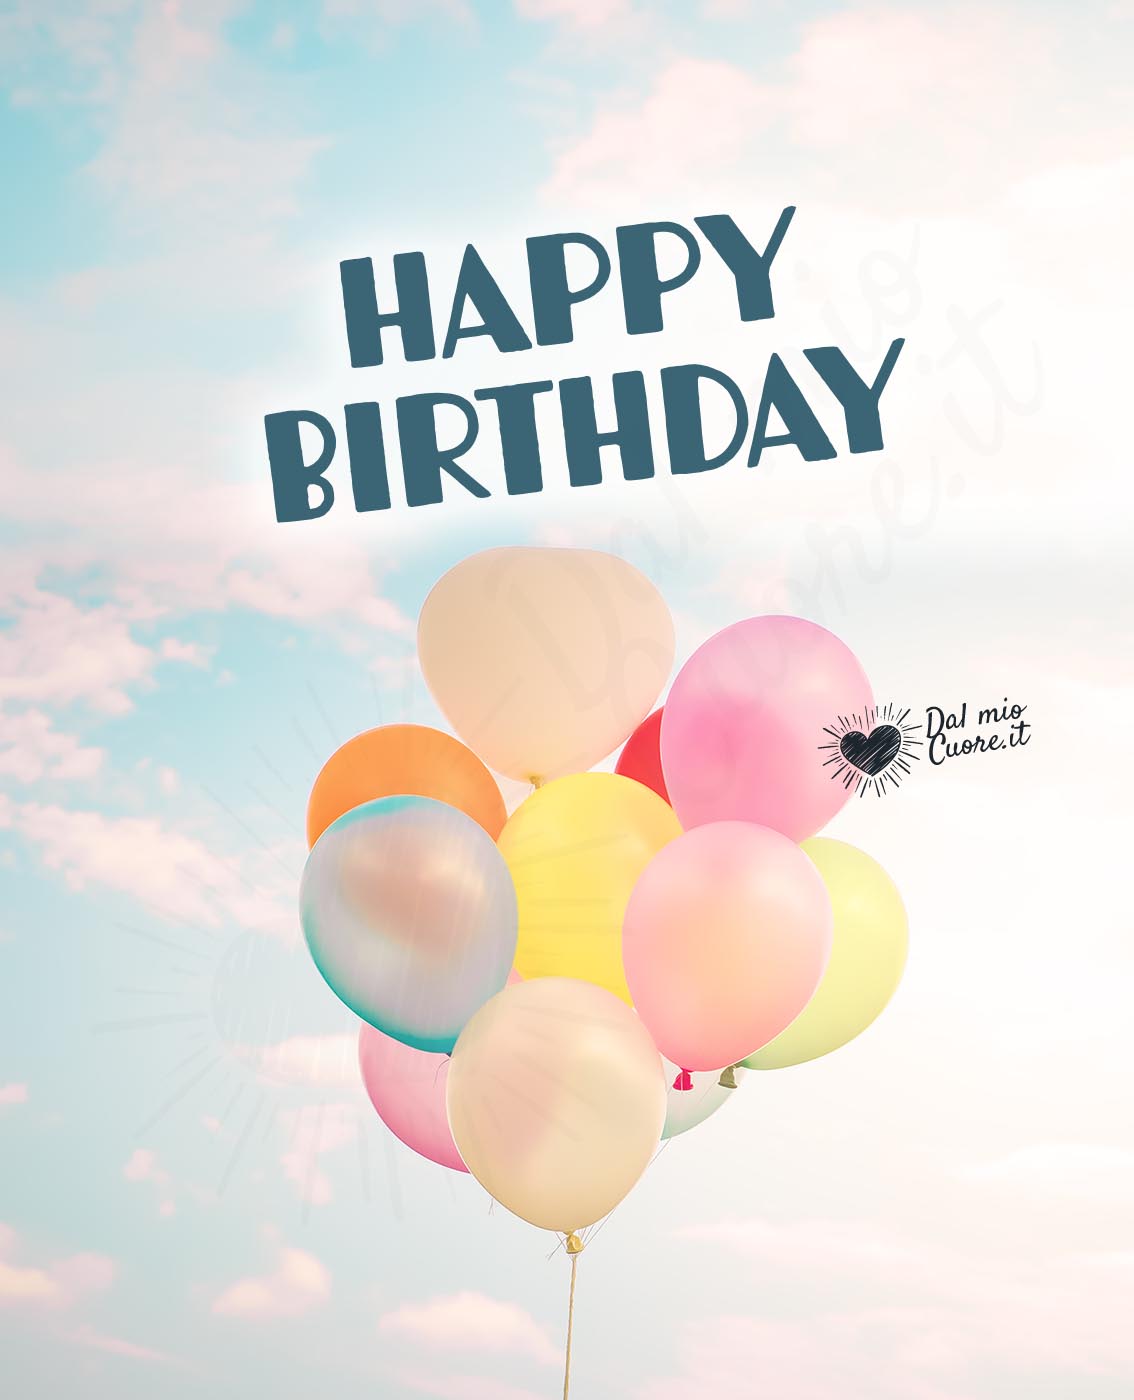 💖 Happy Birthday Wishes! Images, GIFS and Videos for FREE